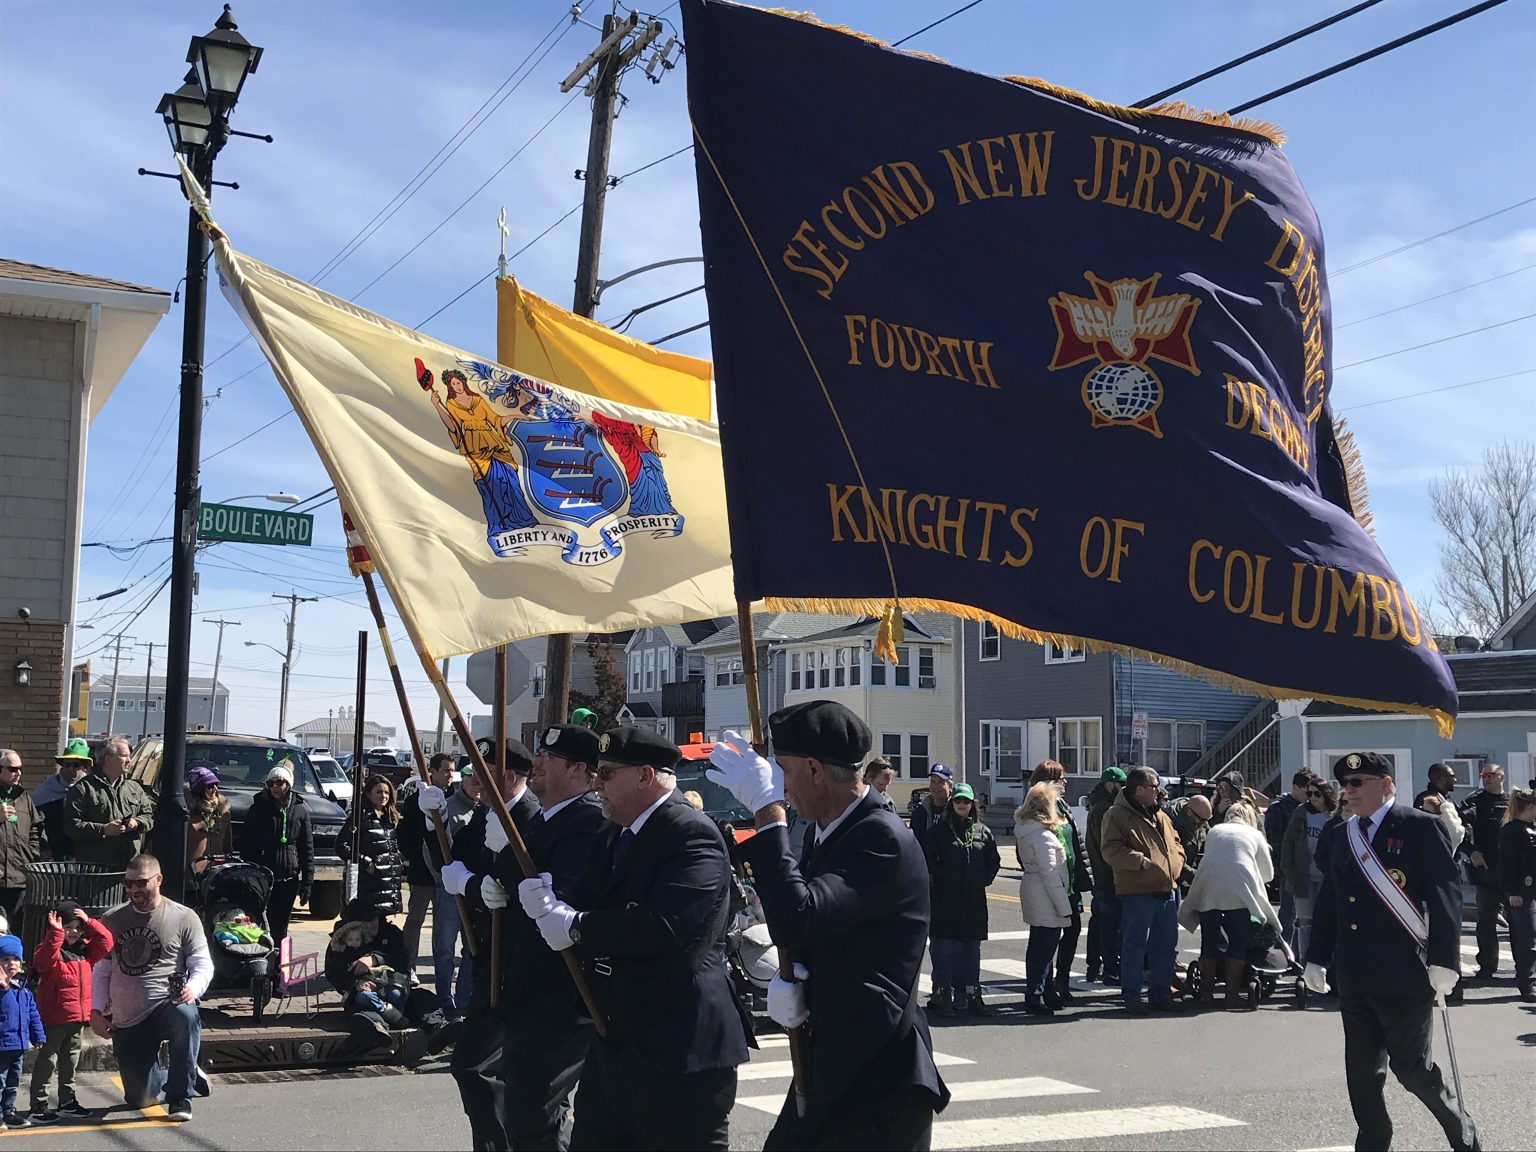 Seaside Heights St. Patrick’s Day Parade Postponed To April 2 Due to